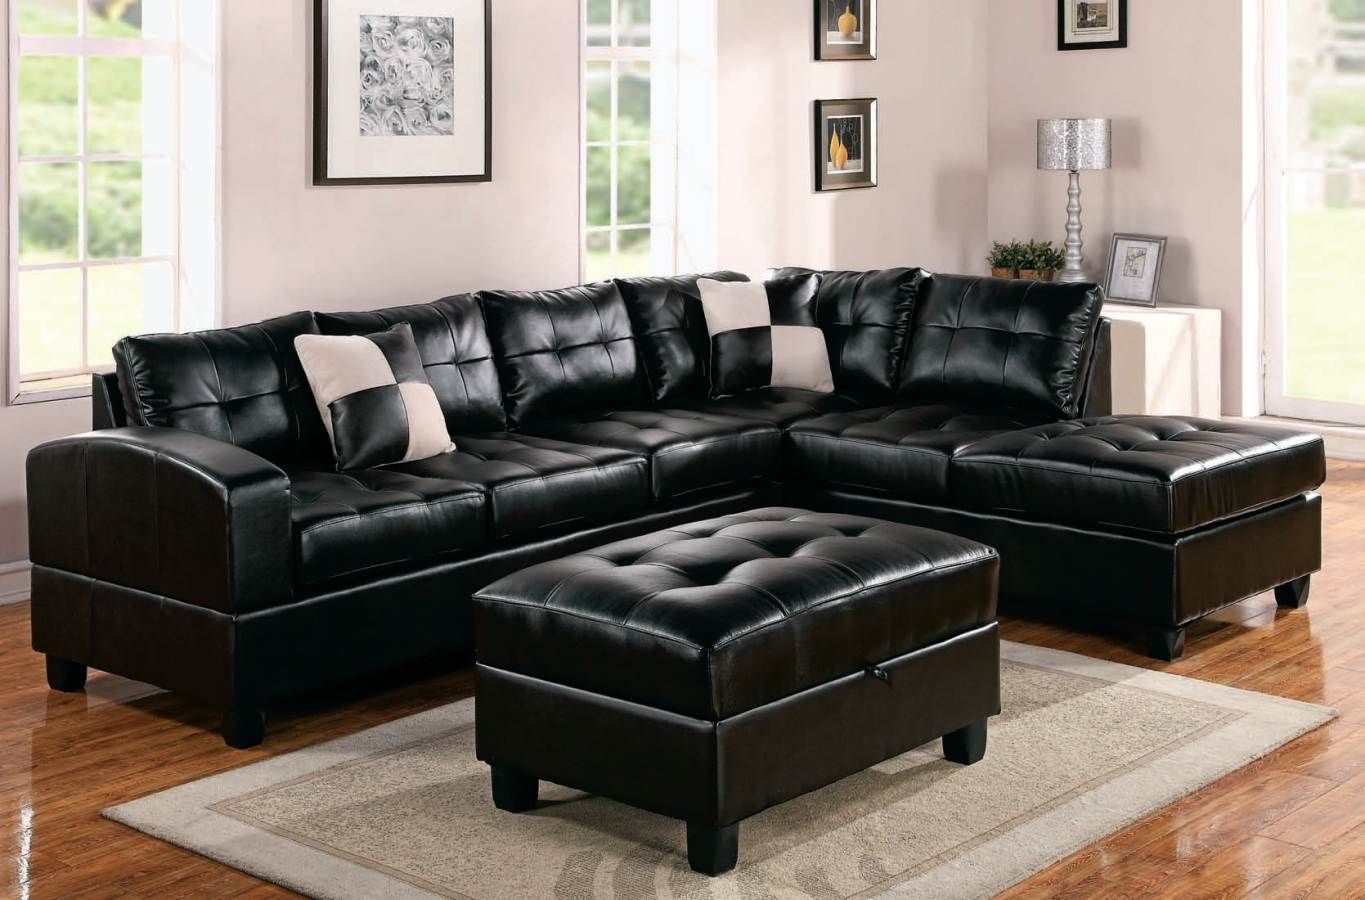 Modern Black Leather Sectional Sofa – Home Furniture Design Pertaining To Right Facing Black Sofas (Gallery 9 of 20)